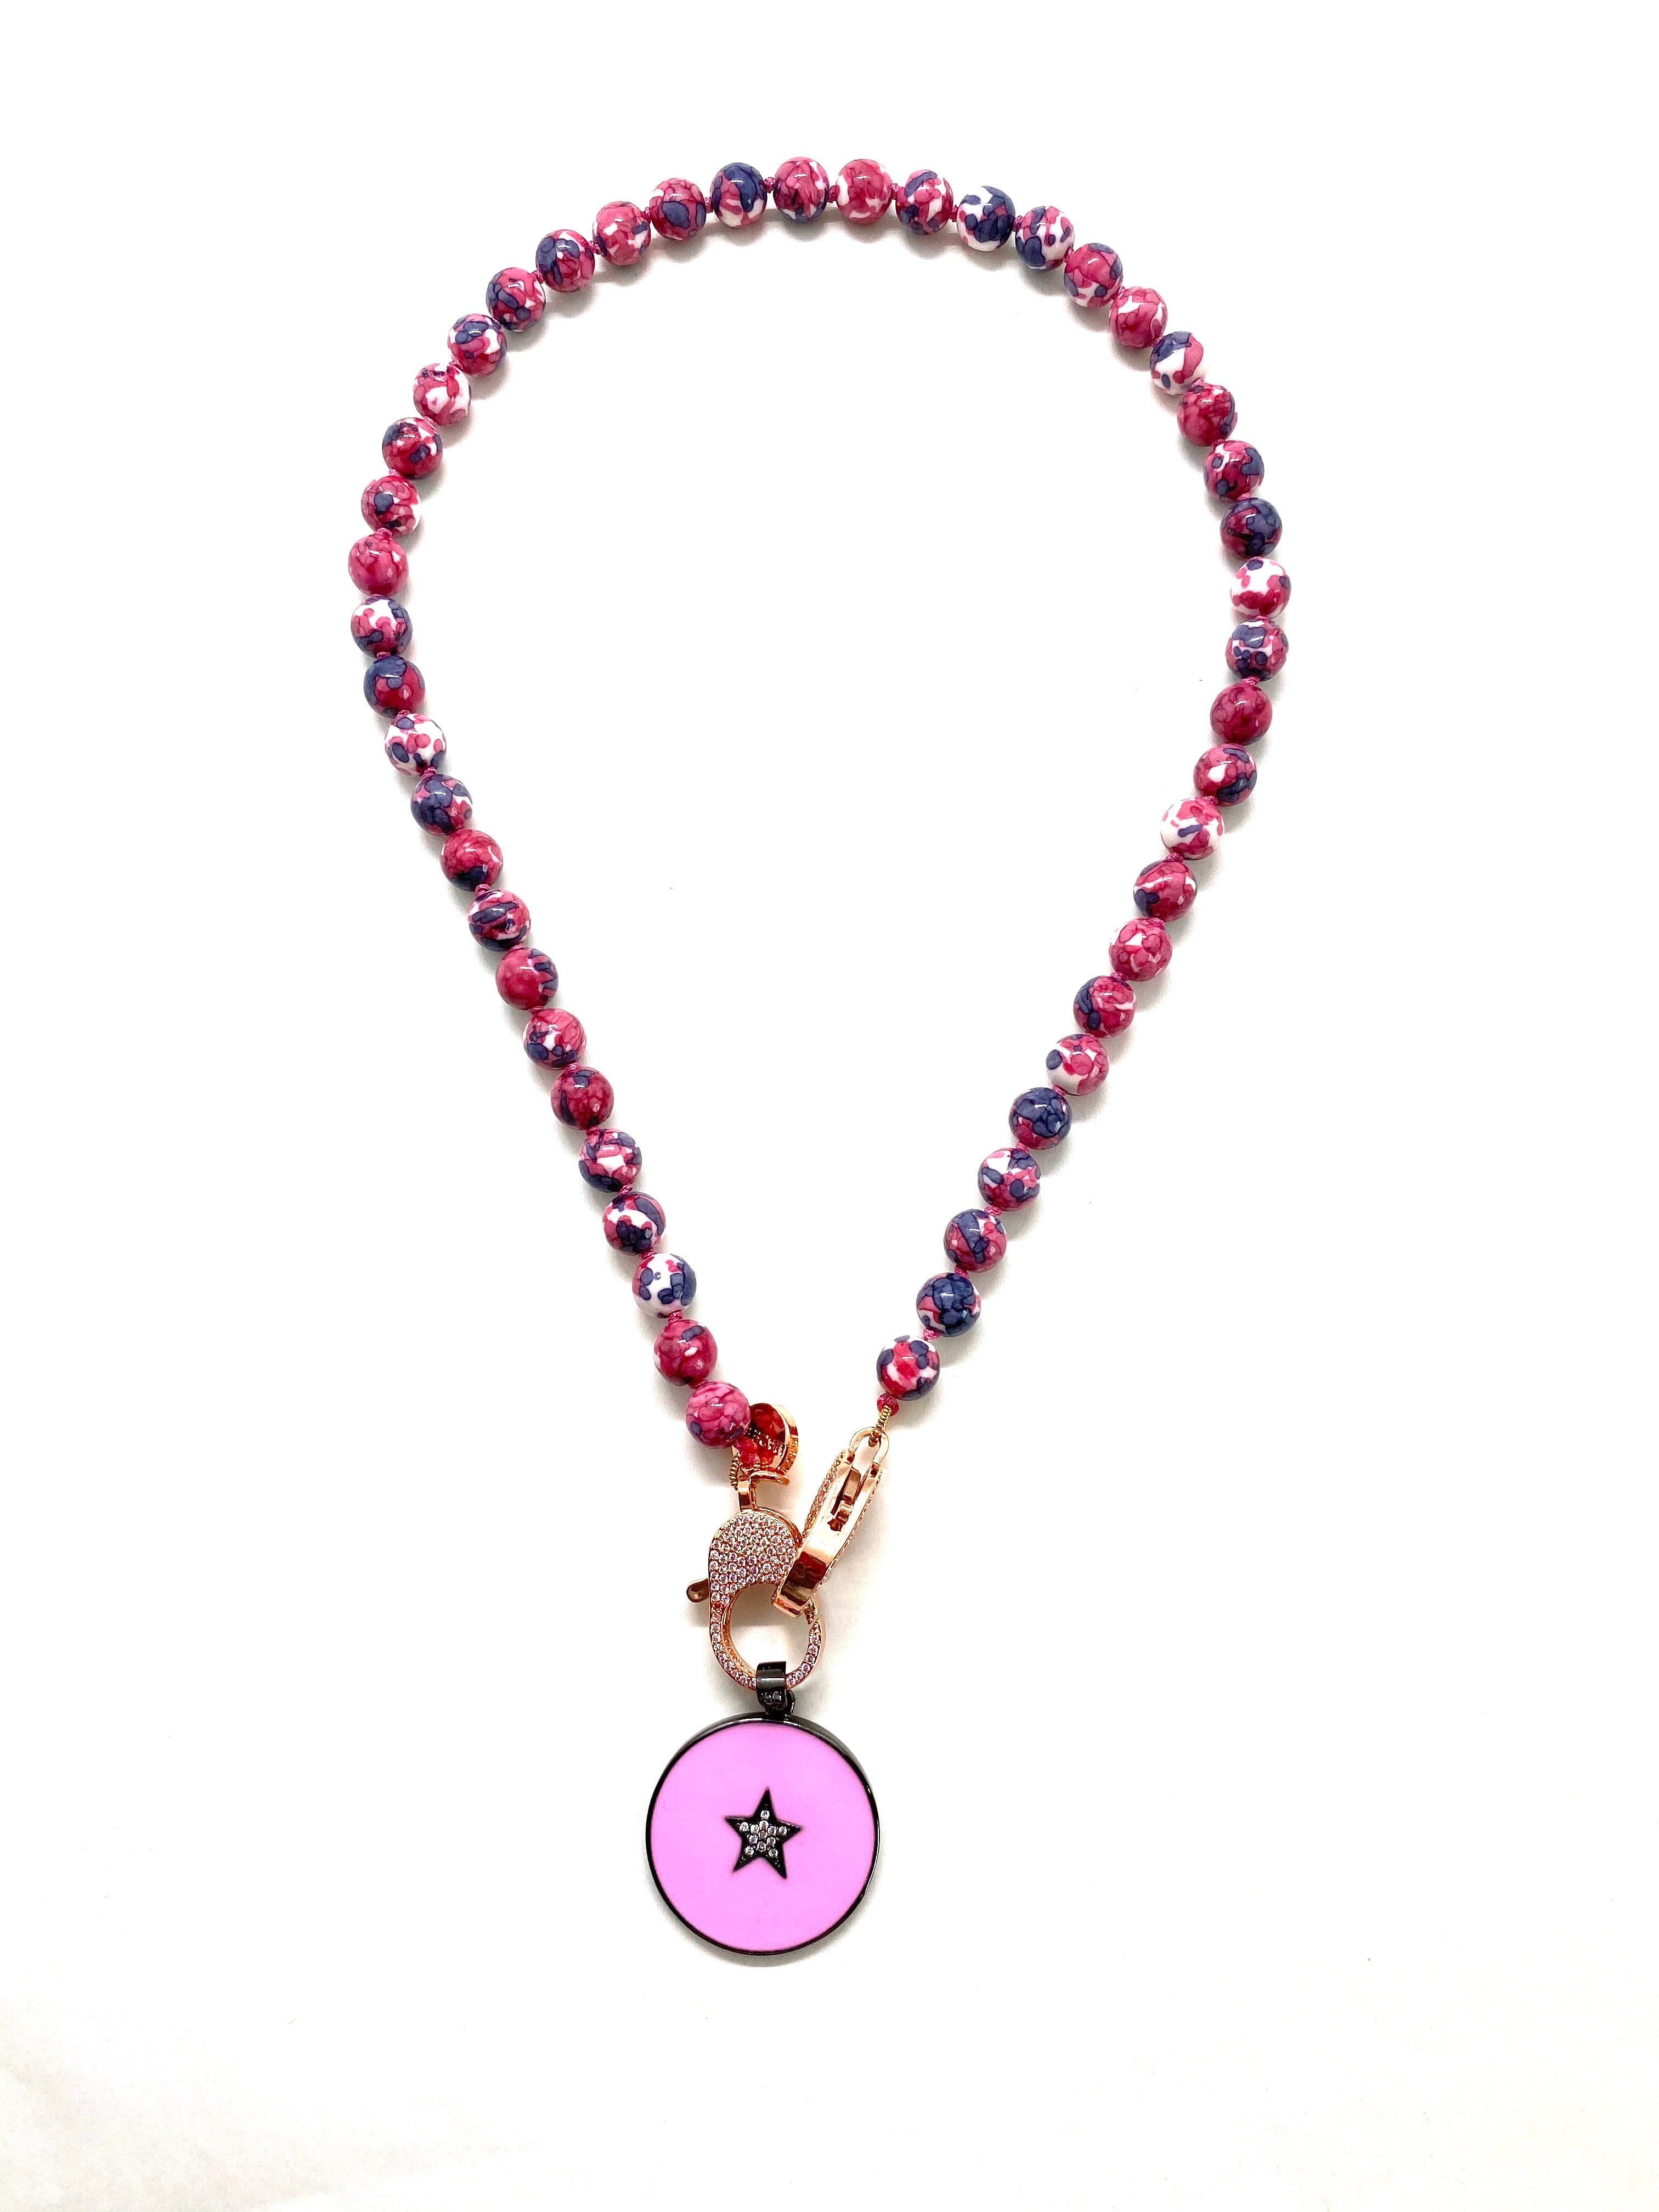 Rose rainbow Gaia necklace, pink circle star pendant, rose gold clips